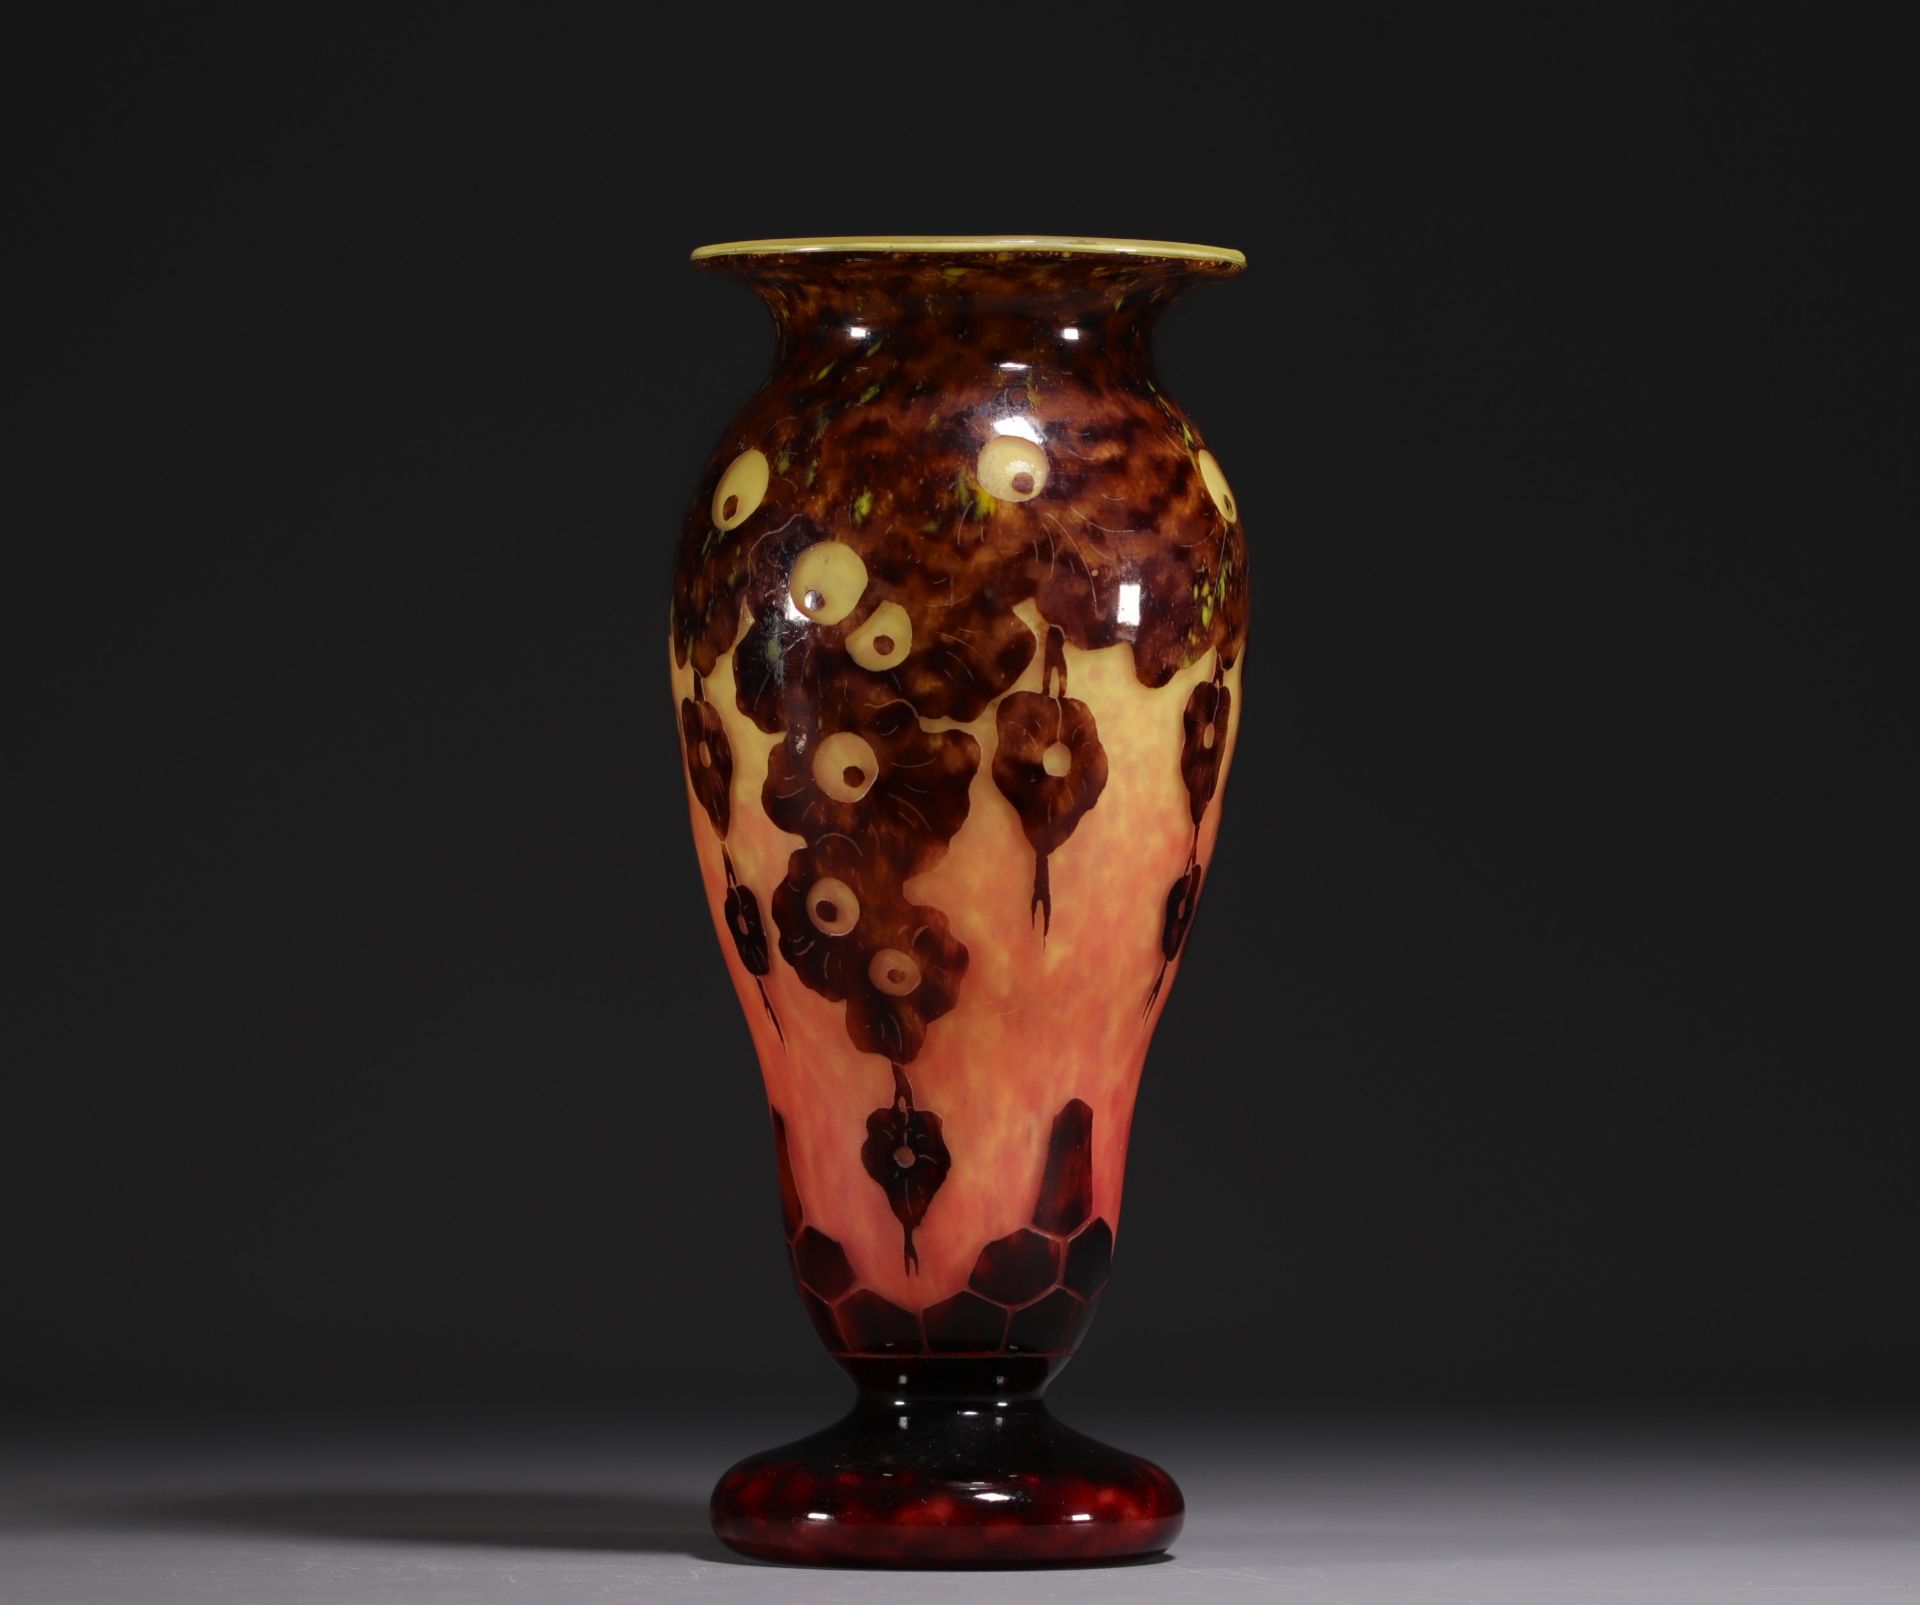 Le Verre Francais - Acid-etched multi-layered glass vase with oak decor, signed on the base. - Image 2 of 4